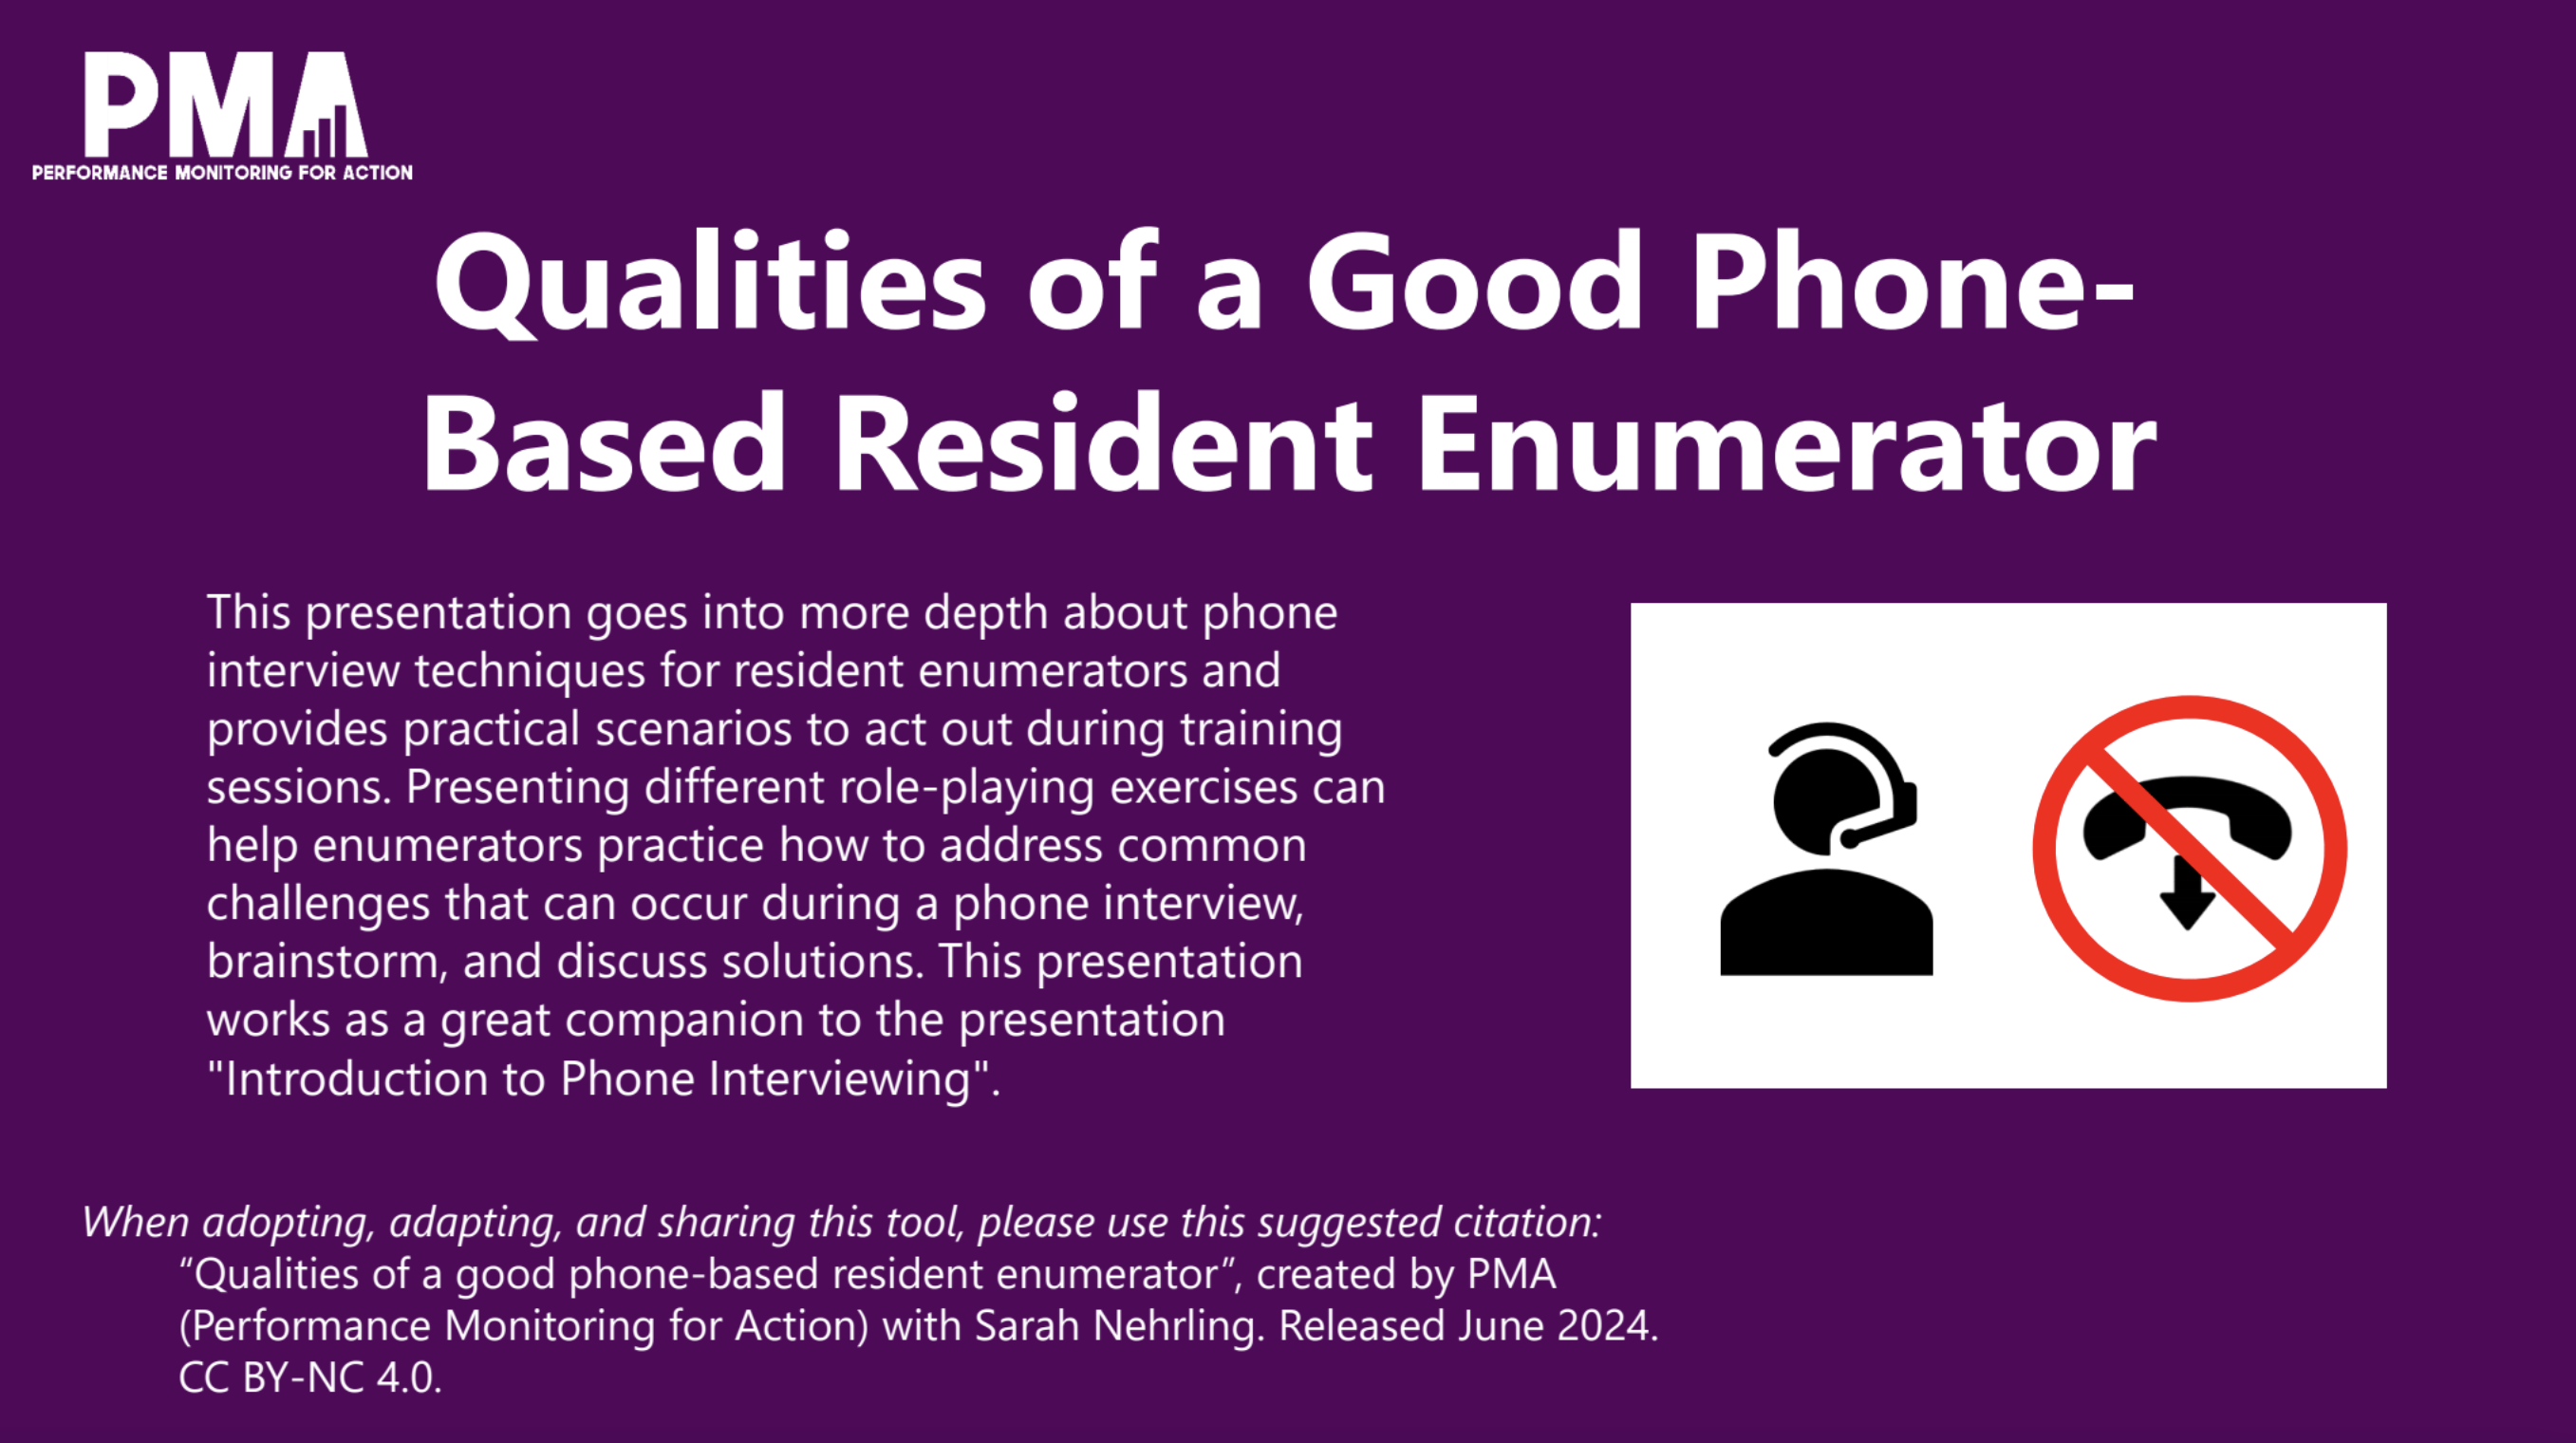 Qualities of a Good Phone-Based Resident Enumerator